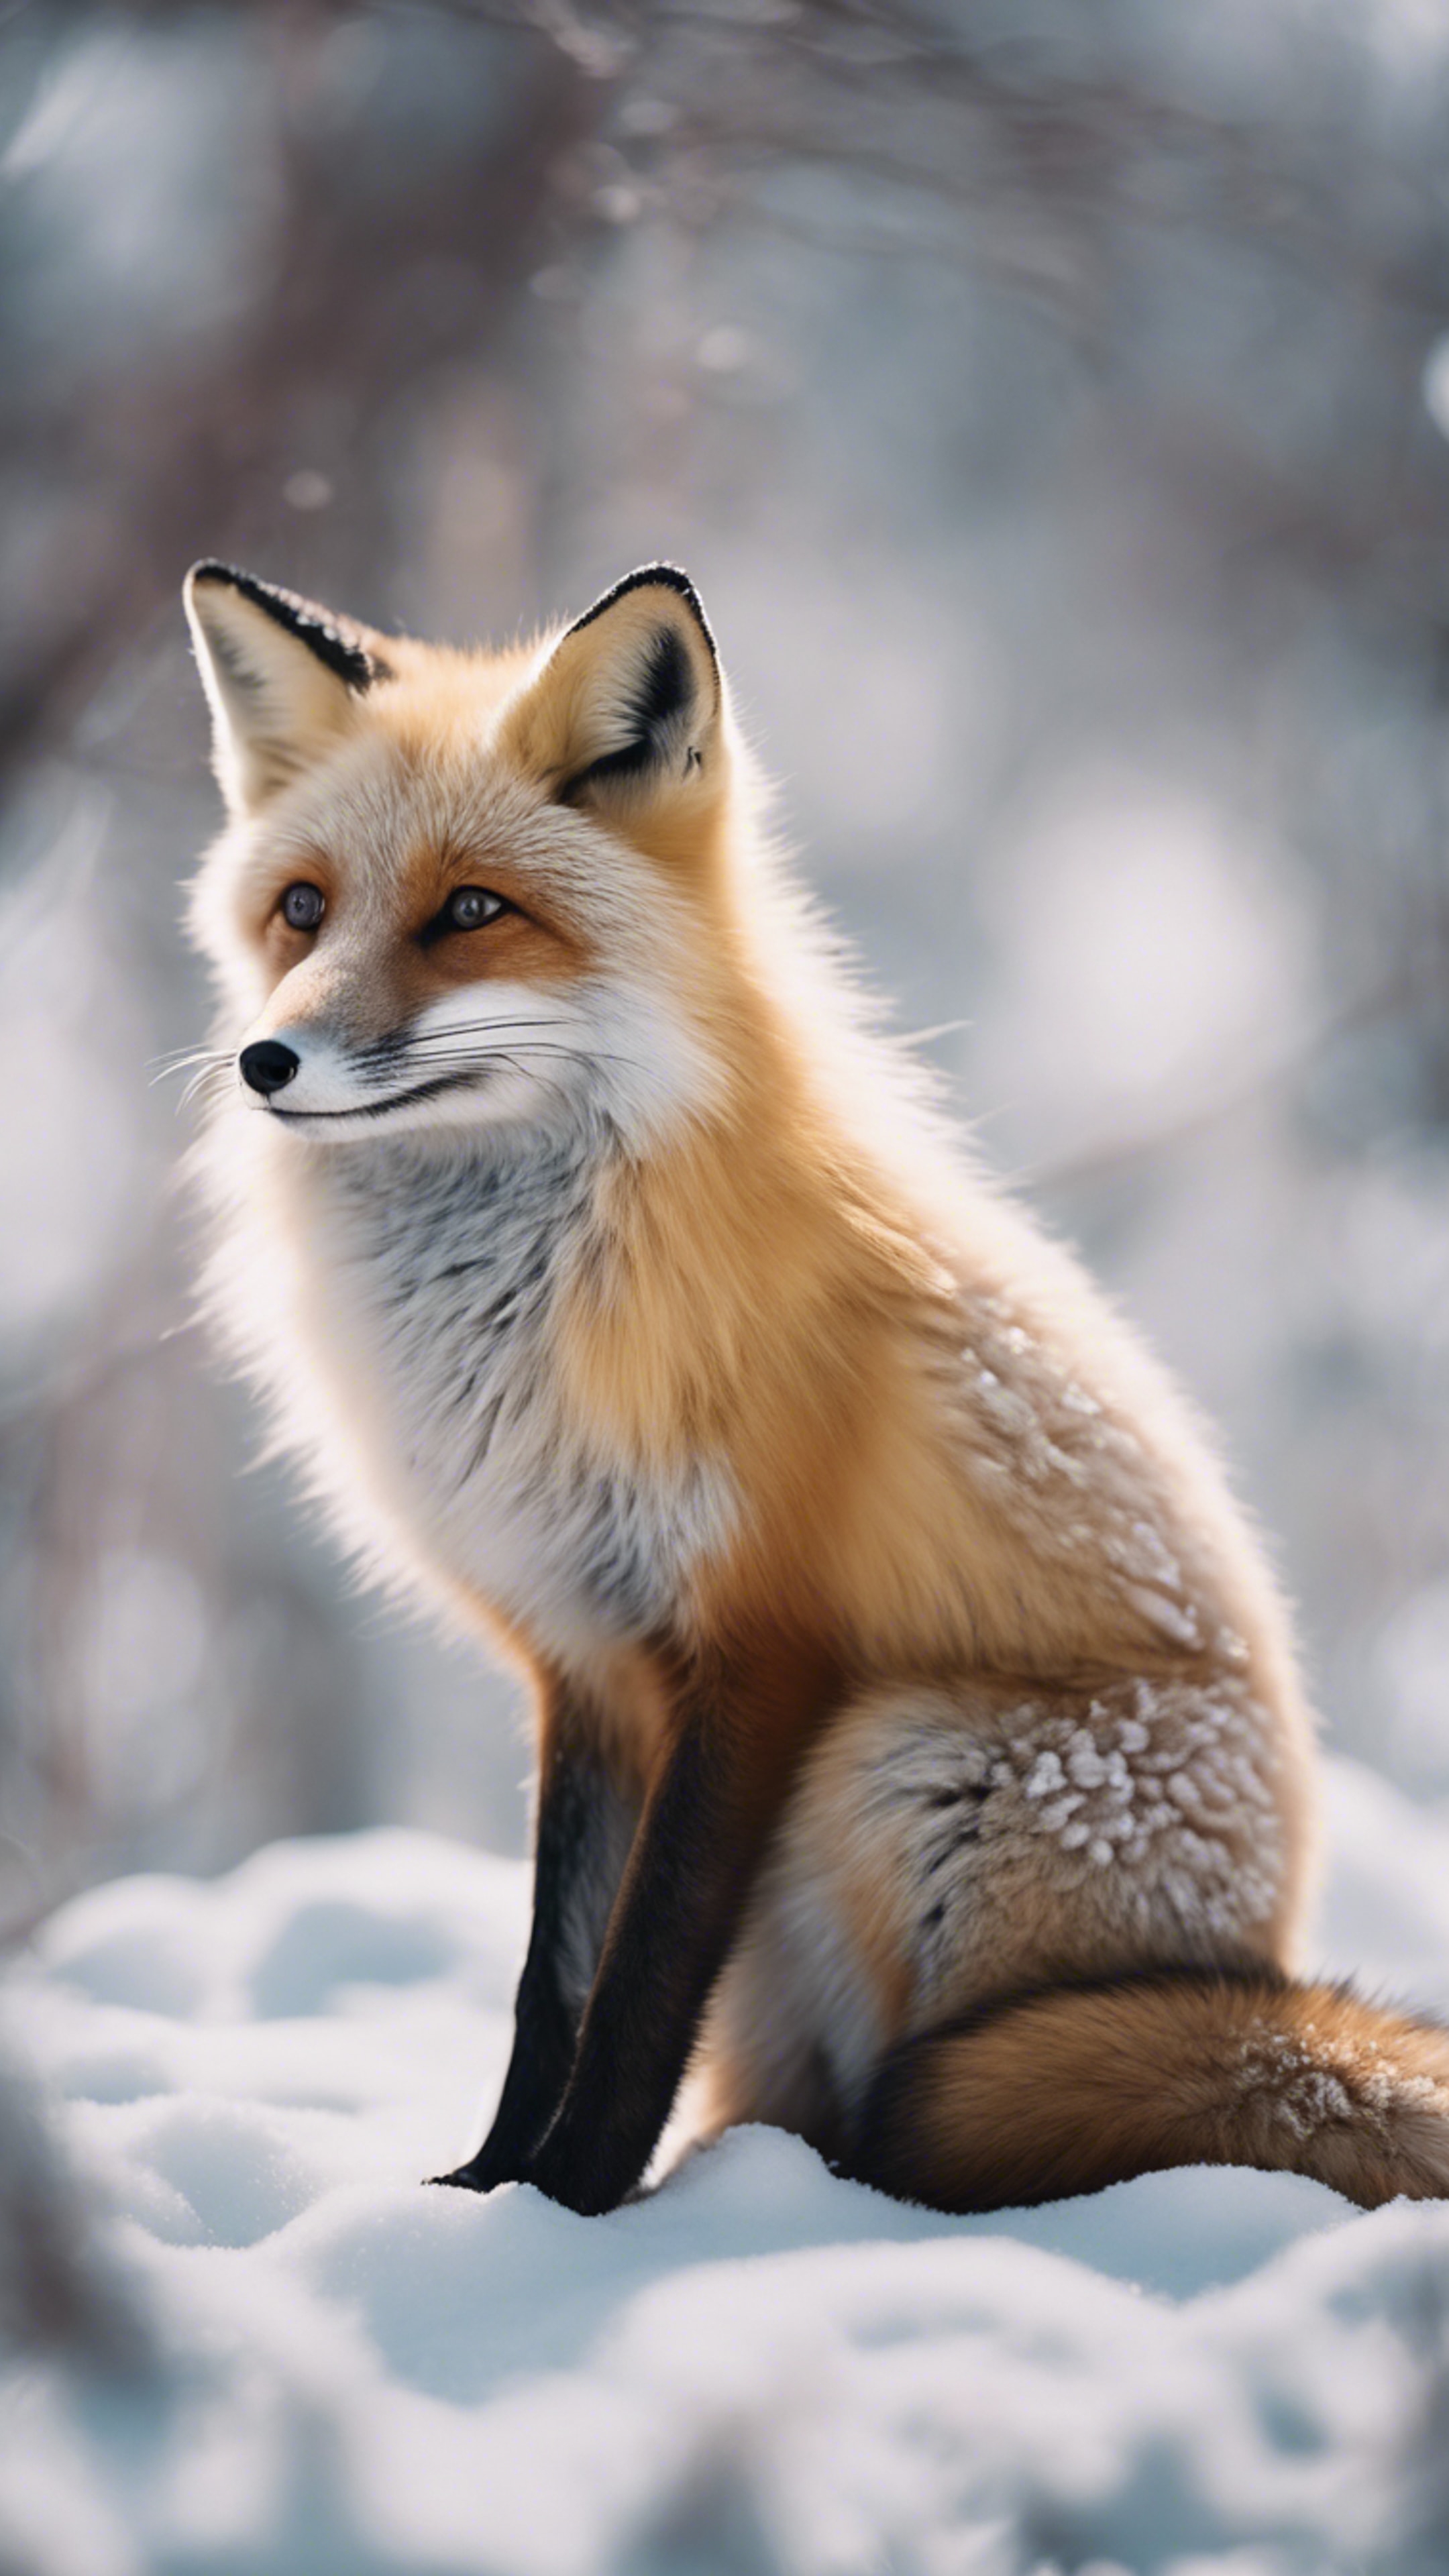 A kawaii beige fox with big black eyes and soft fur, peacefully resting in a snowy landscape. Wallpaper[9d6d6e93f3f44361a0b2]